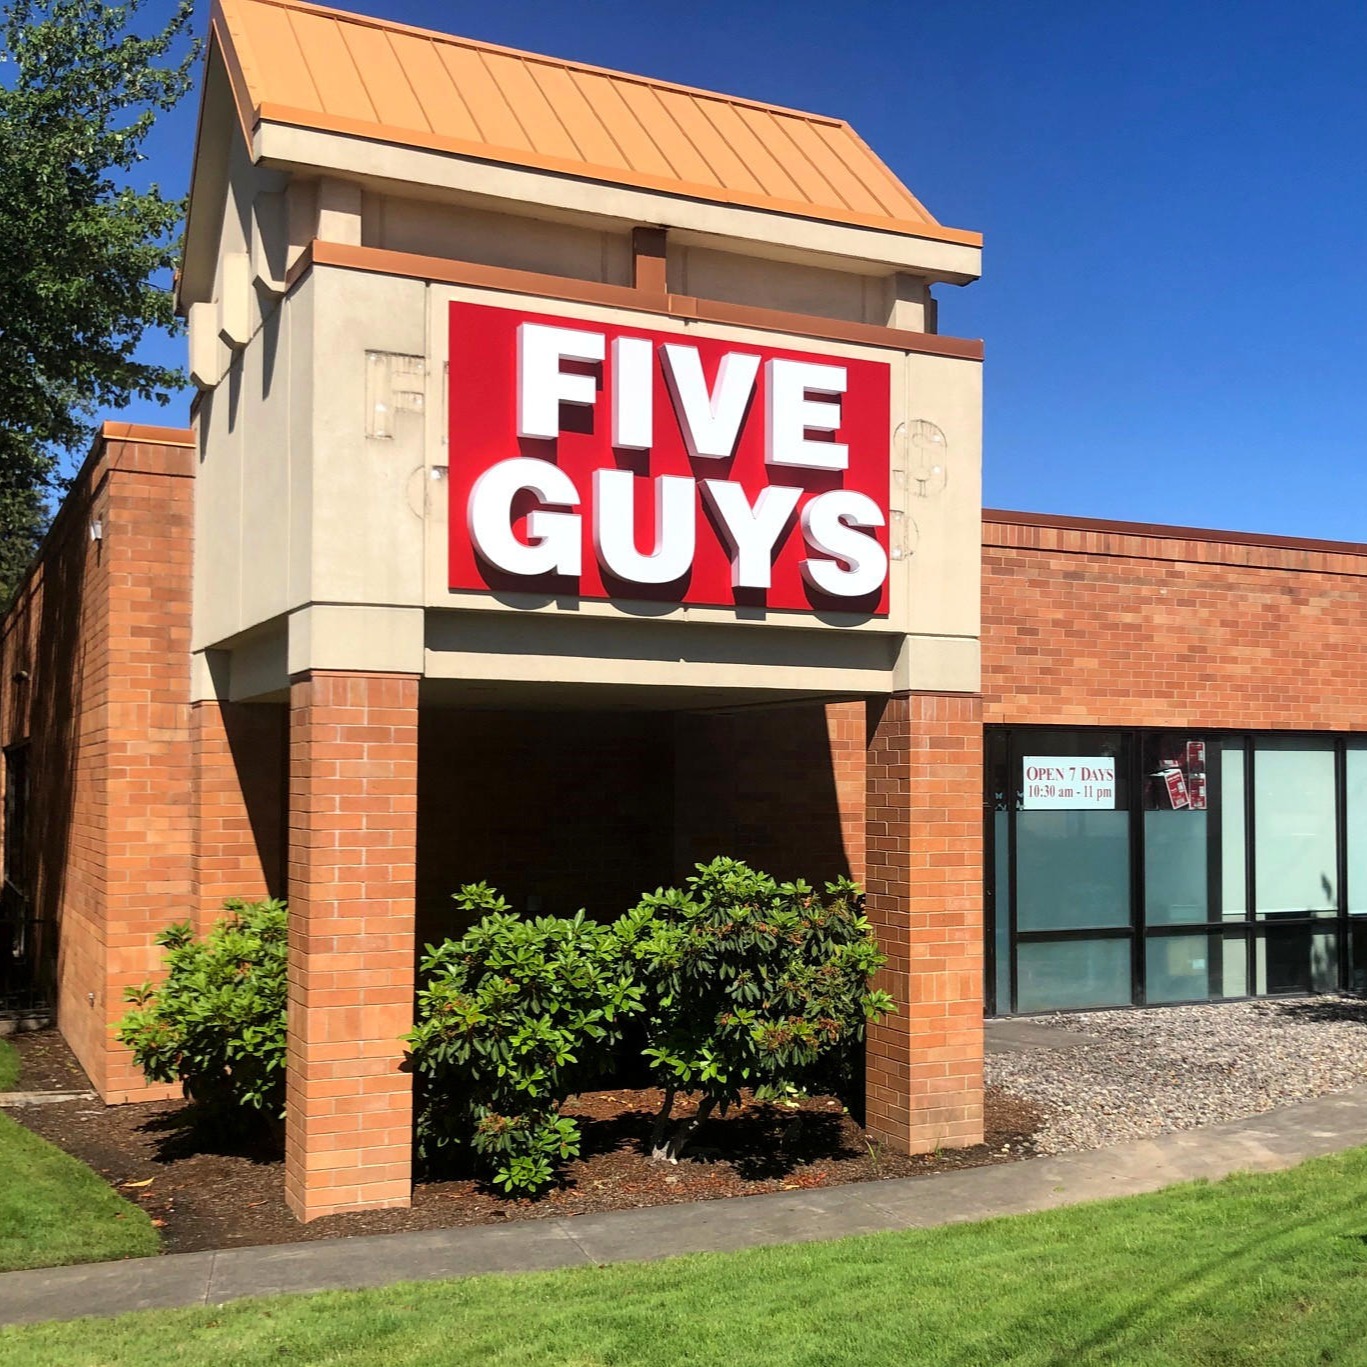 Five Guys at 15129 SE McLoughlin Blvd. in Milwaukie, OR.